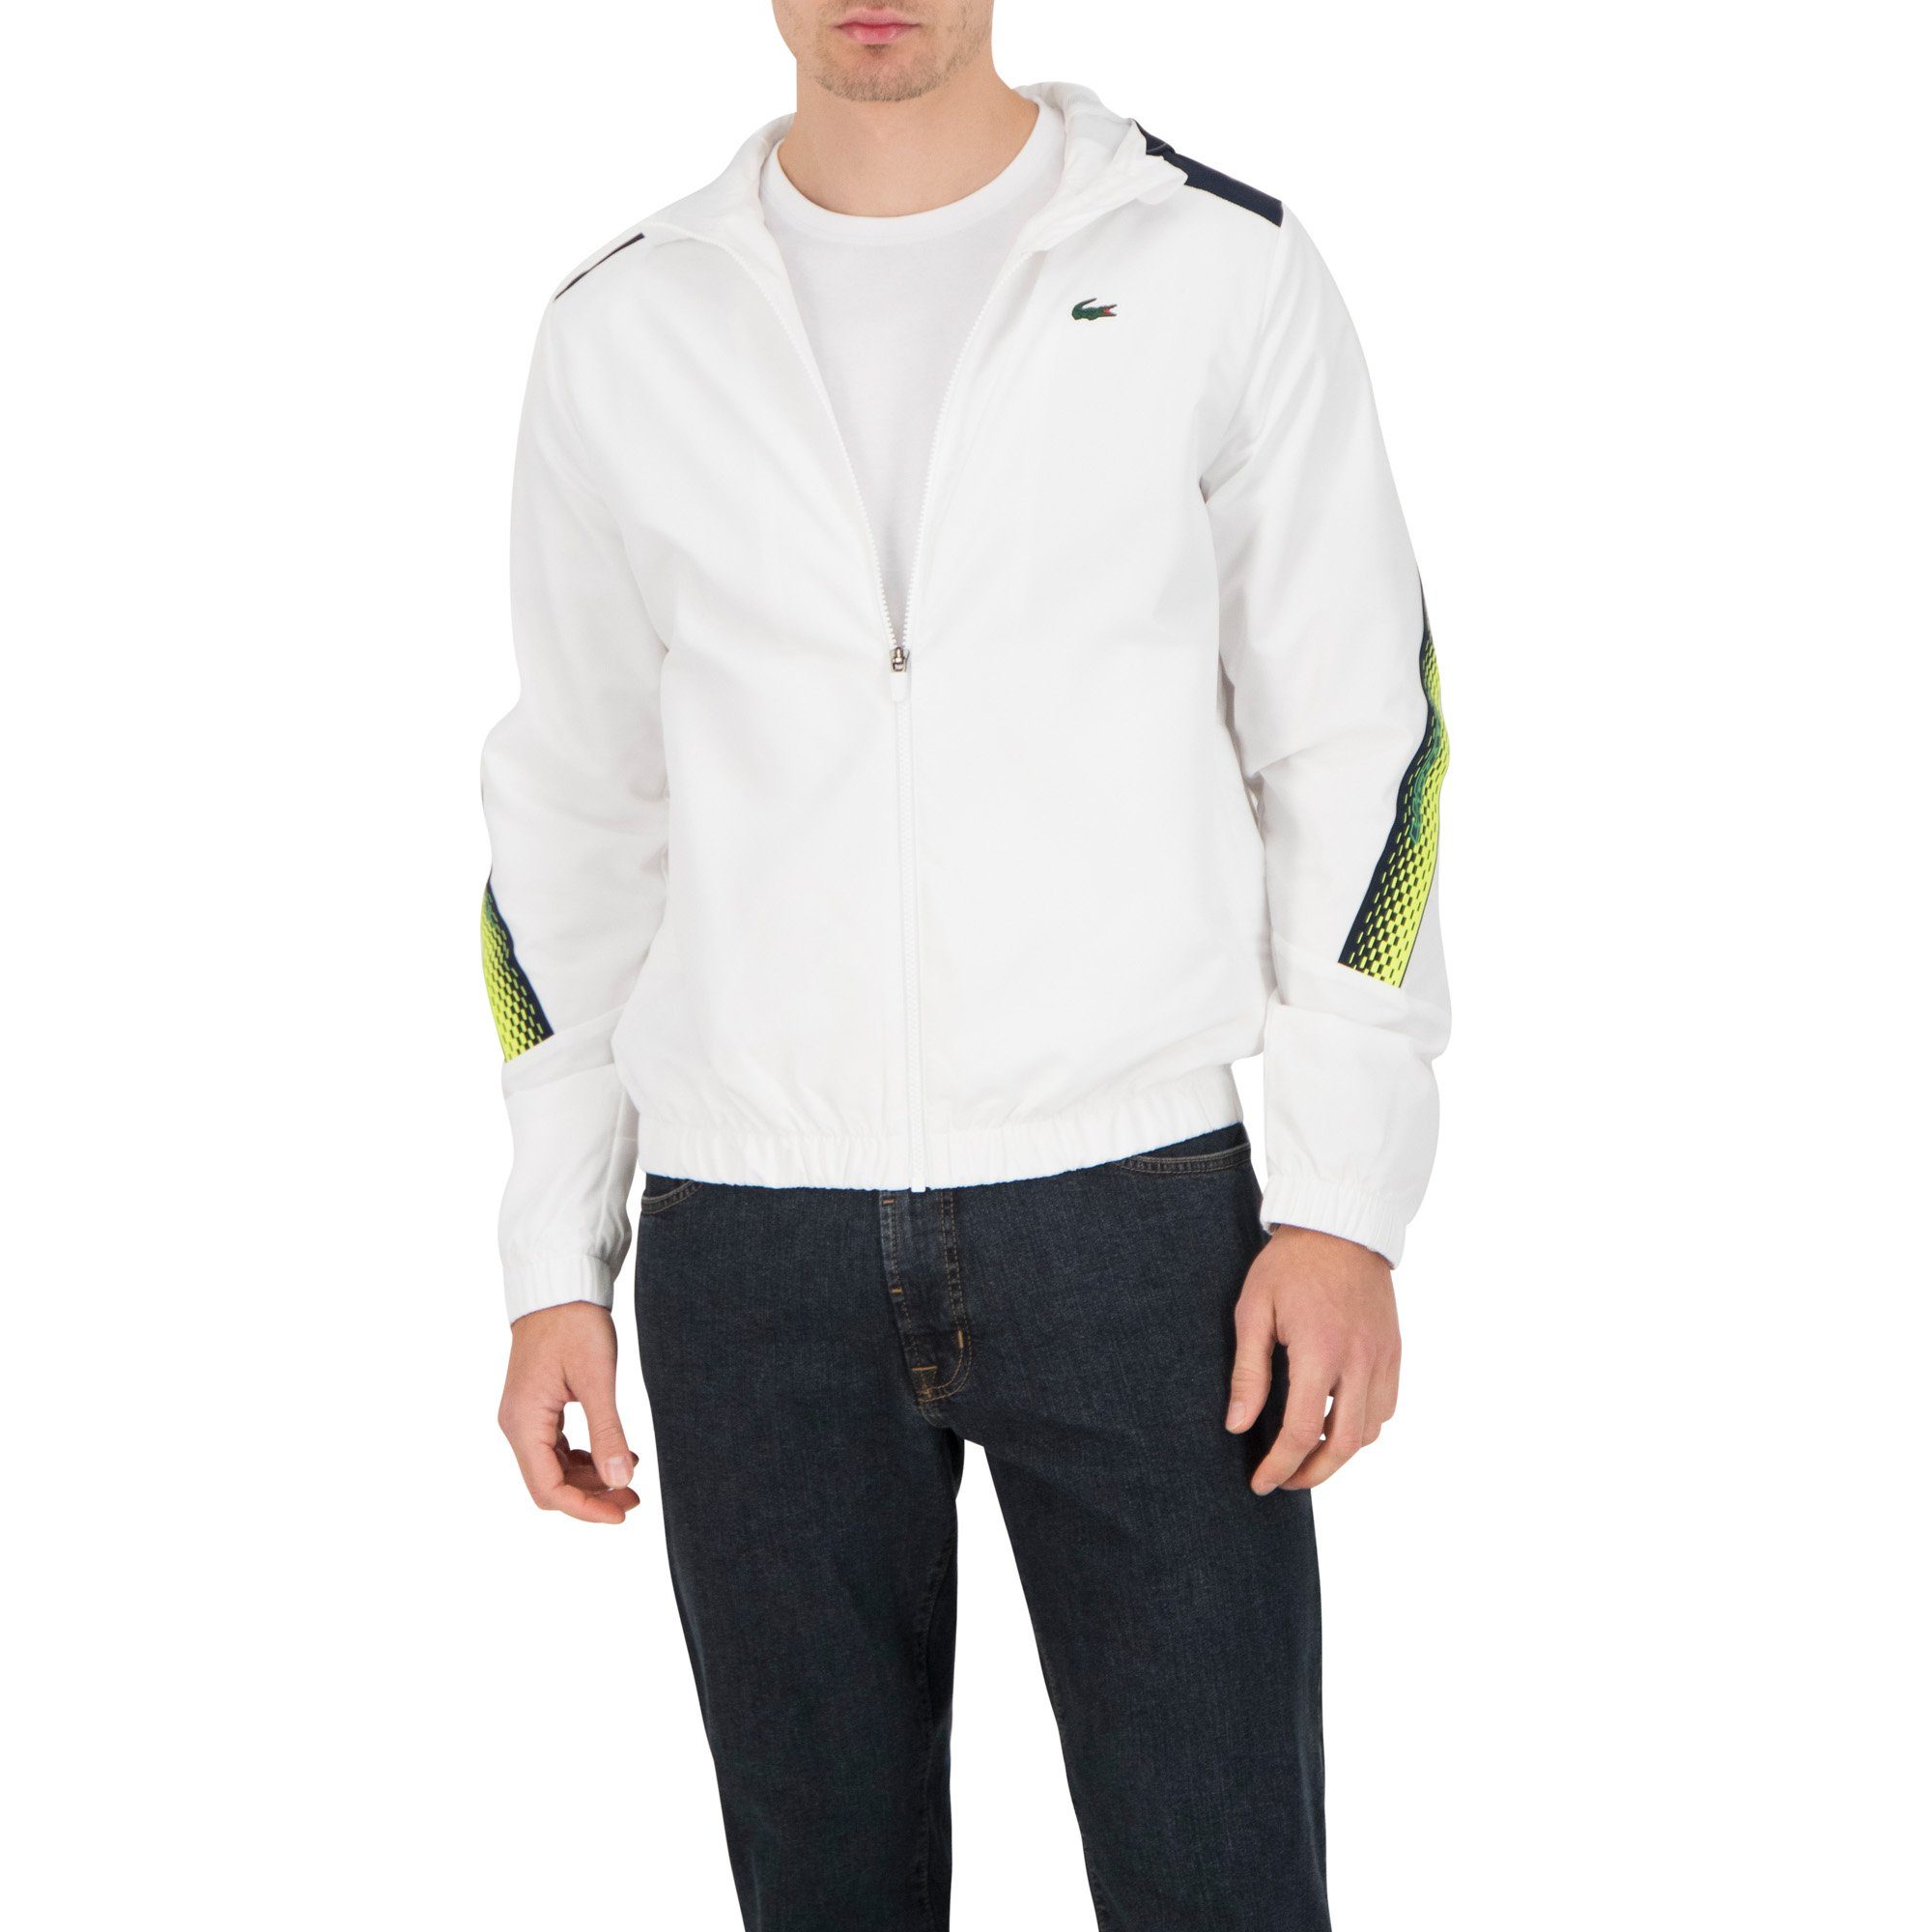 Lacoste Funktionsjacke WHITE/NAVY BLUE-ELECTRIC YELLOW (X1I)